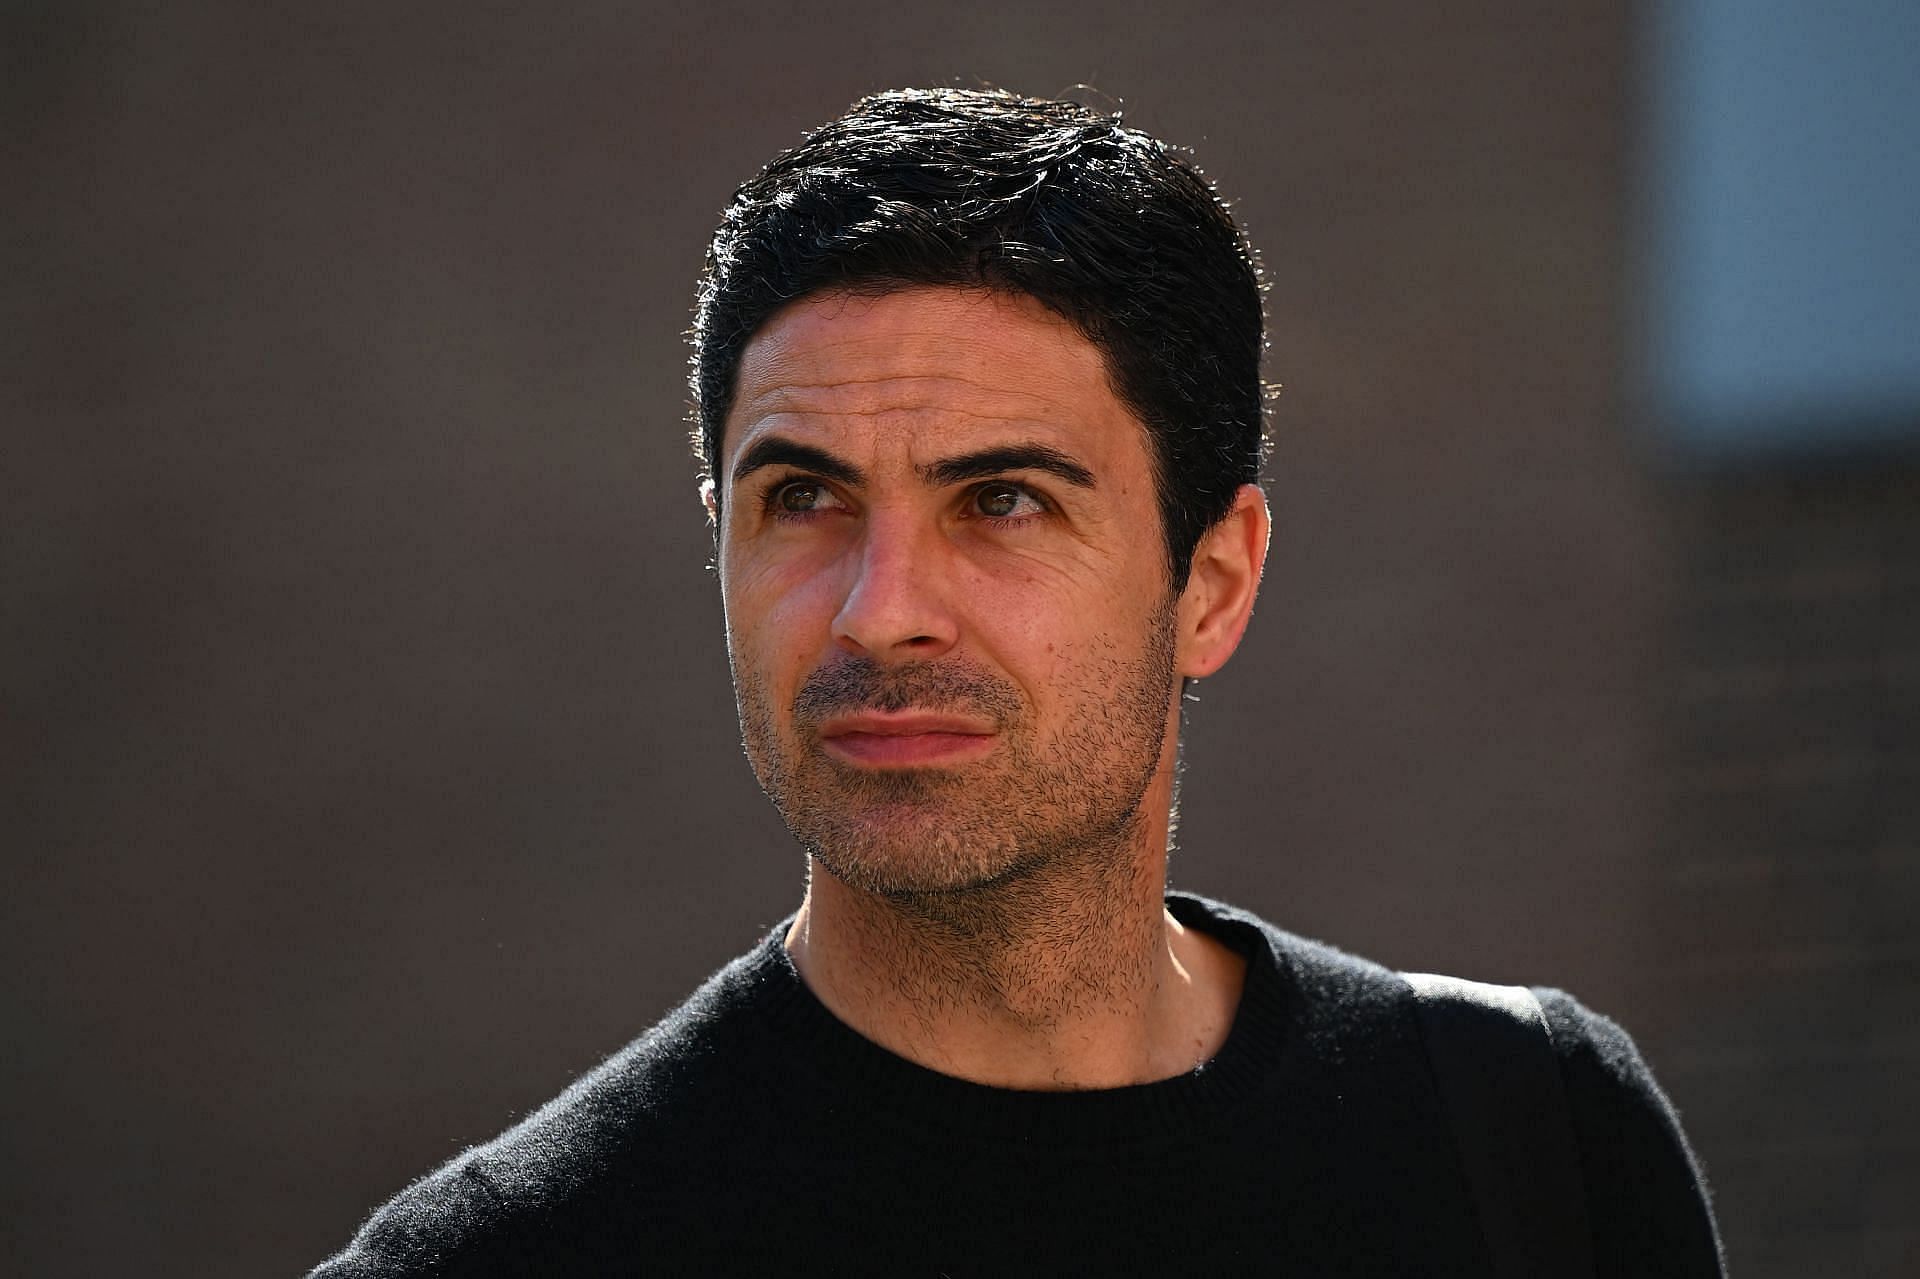 Arsenal manager Mikel Arteta means business this summer